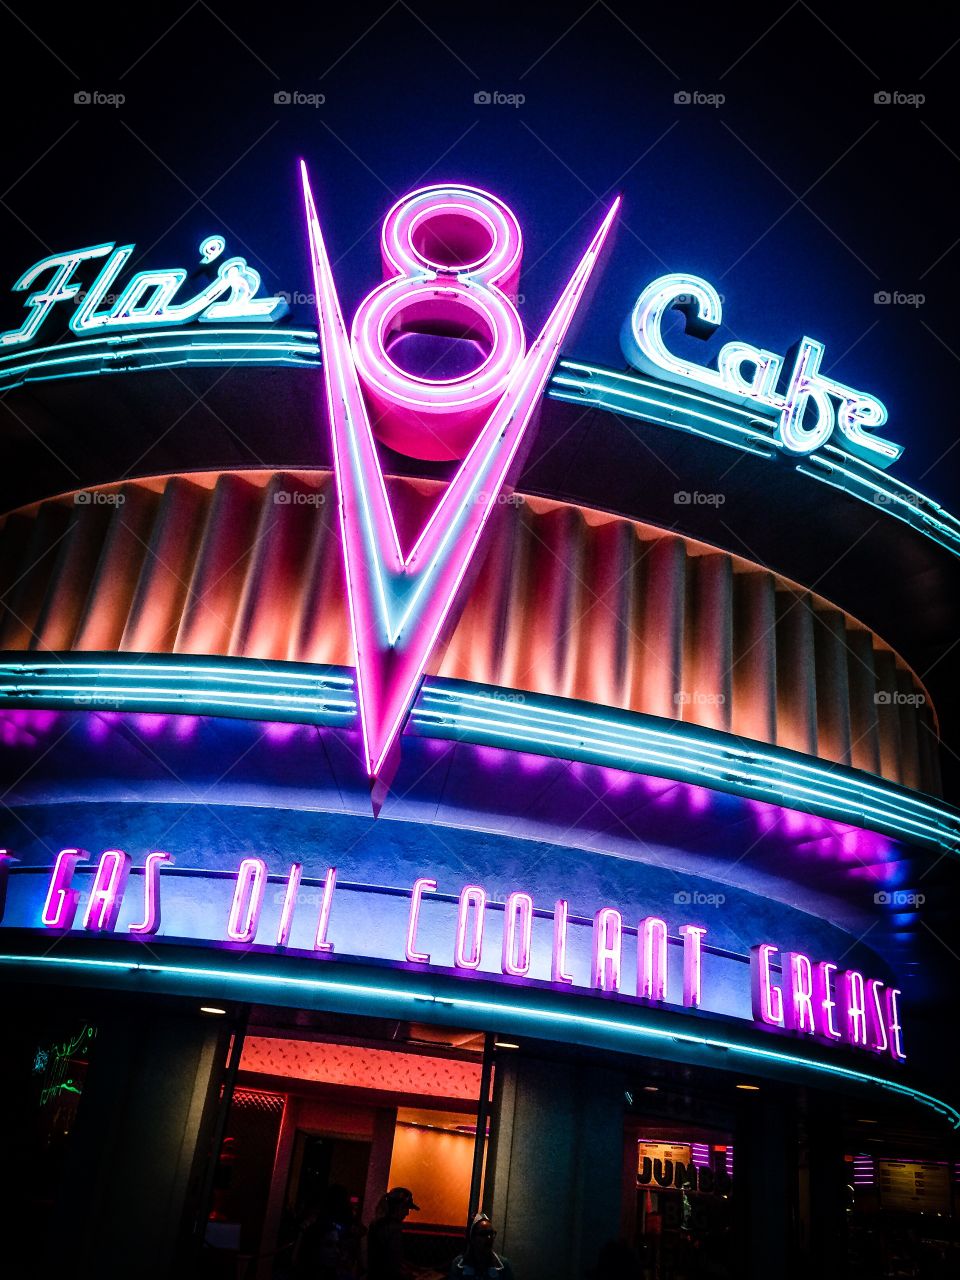 Flo's V-8 Cafe located on Route 66 in downtown Radiator Springs. Stop in and fill up today. You deserve it!